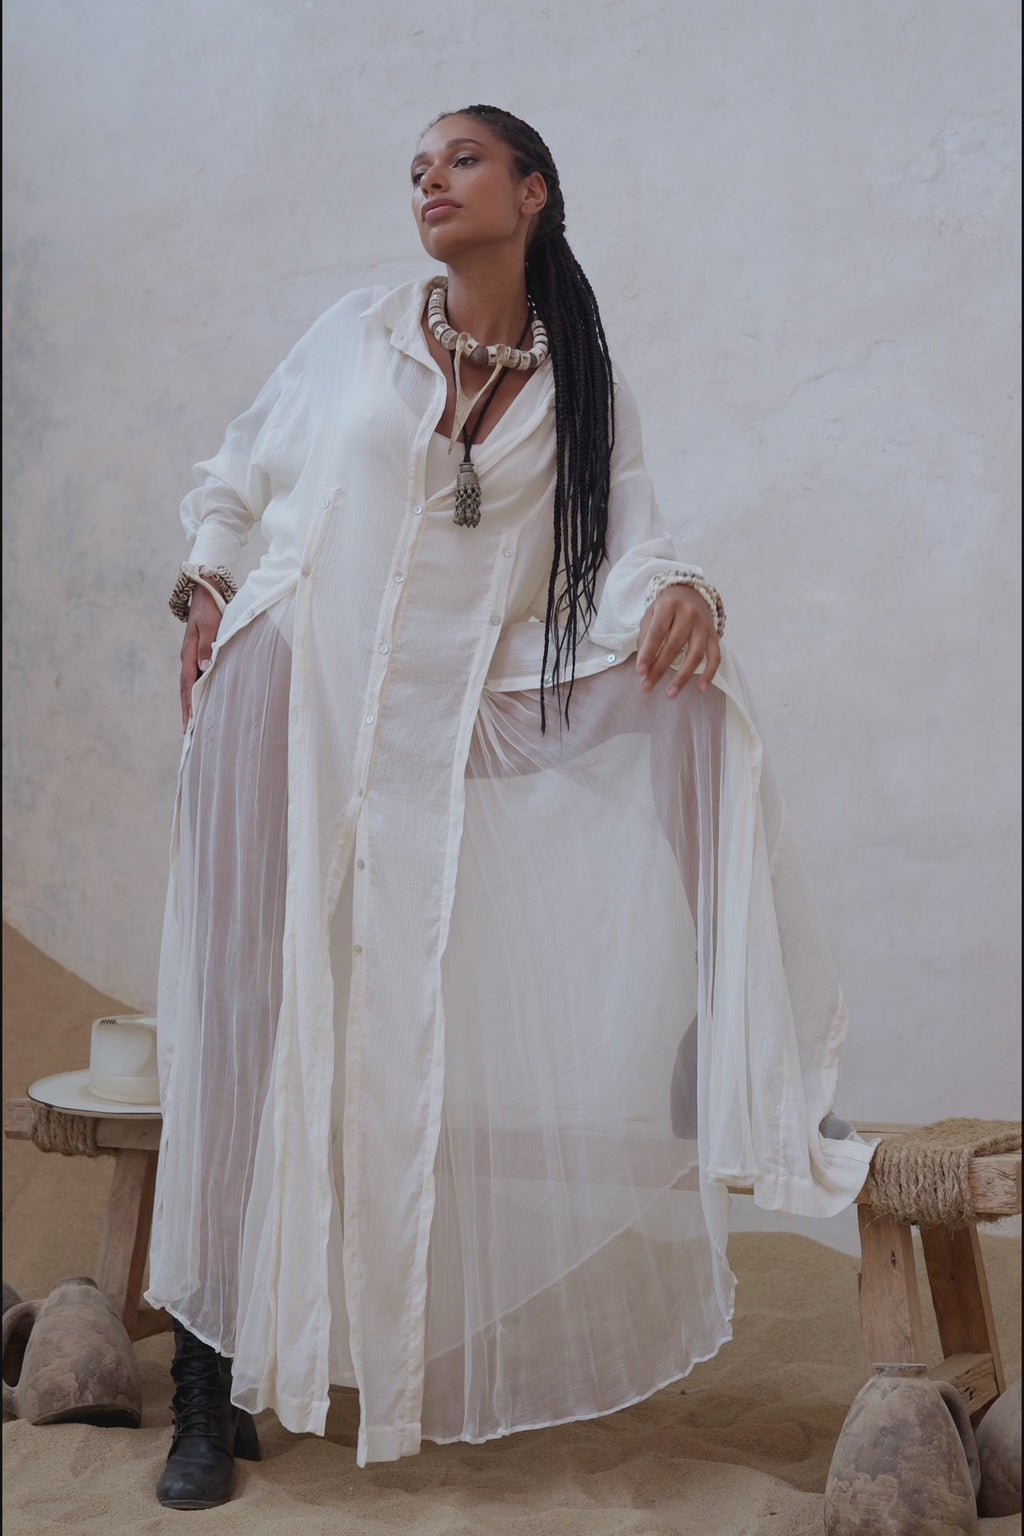 Look beautiful in Aya Sacred Wear's organic Off-White wedding dress. Perfect for your special day.